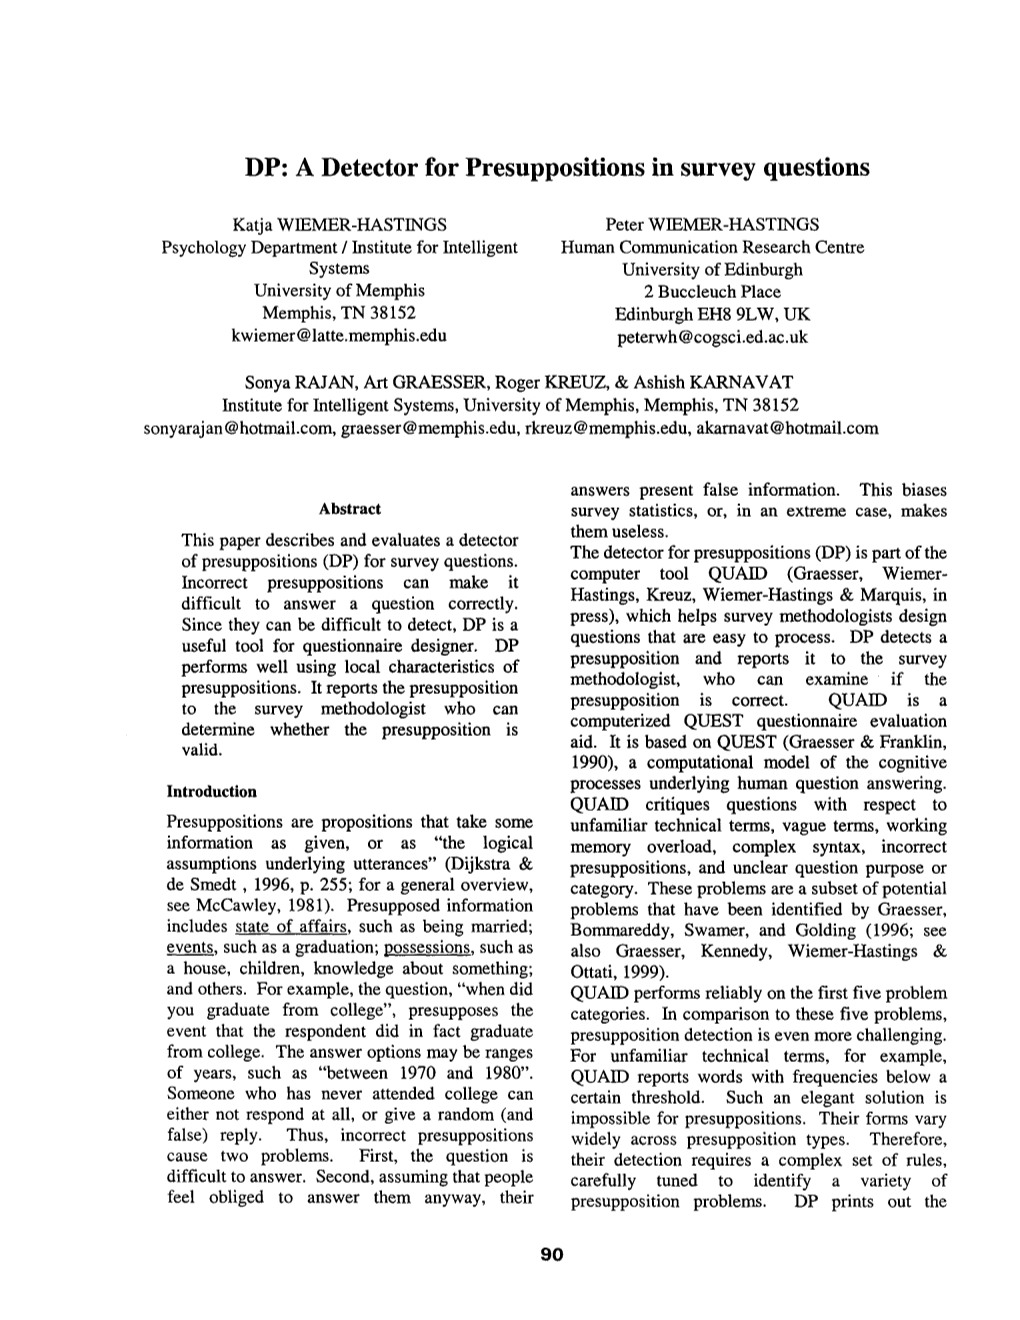 A Detector for Presuppositions in Survey Questions